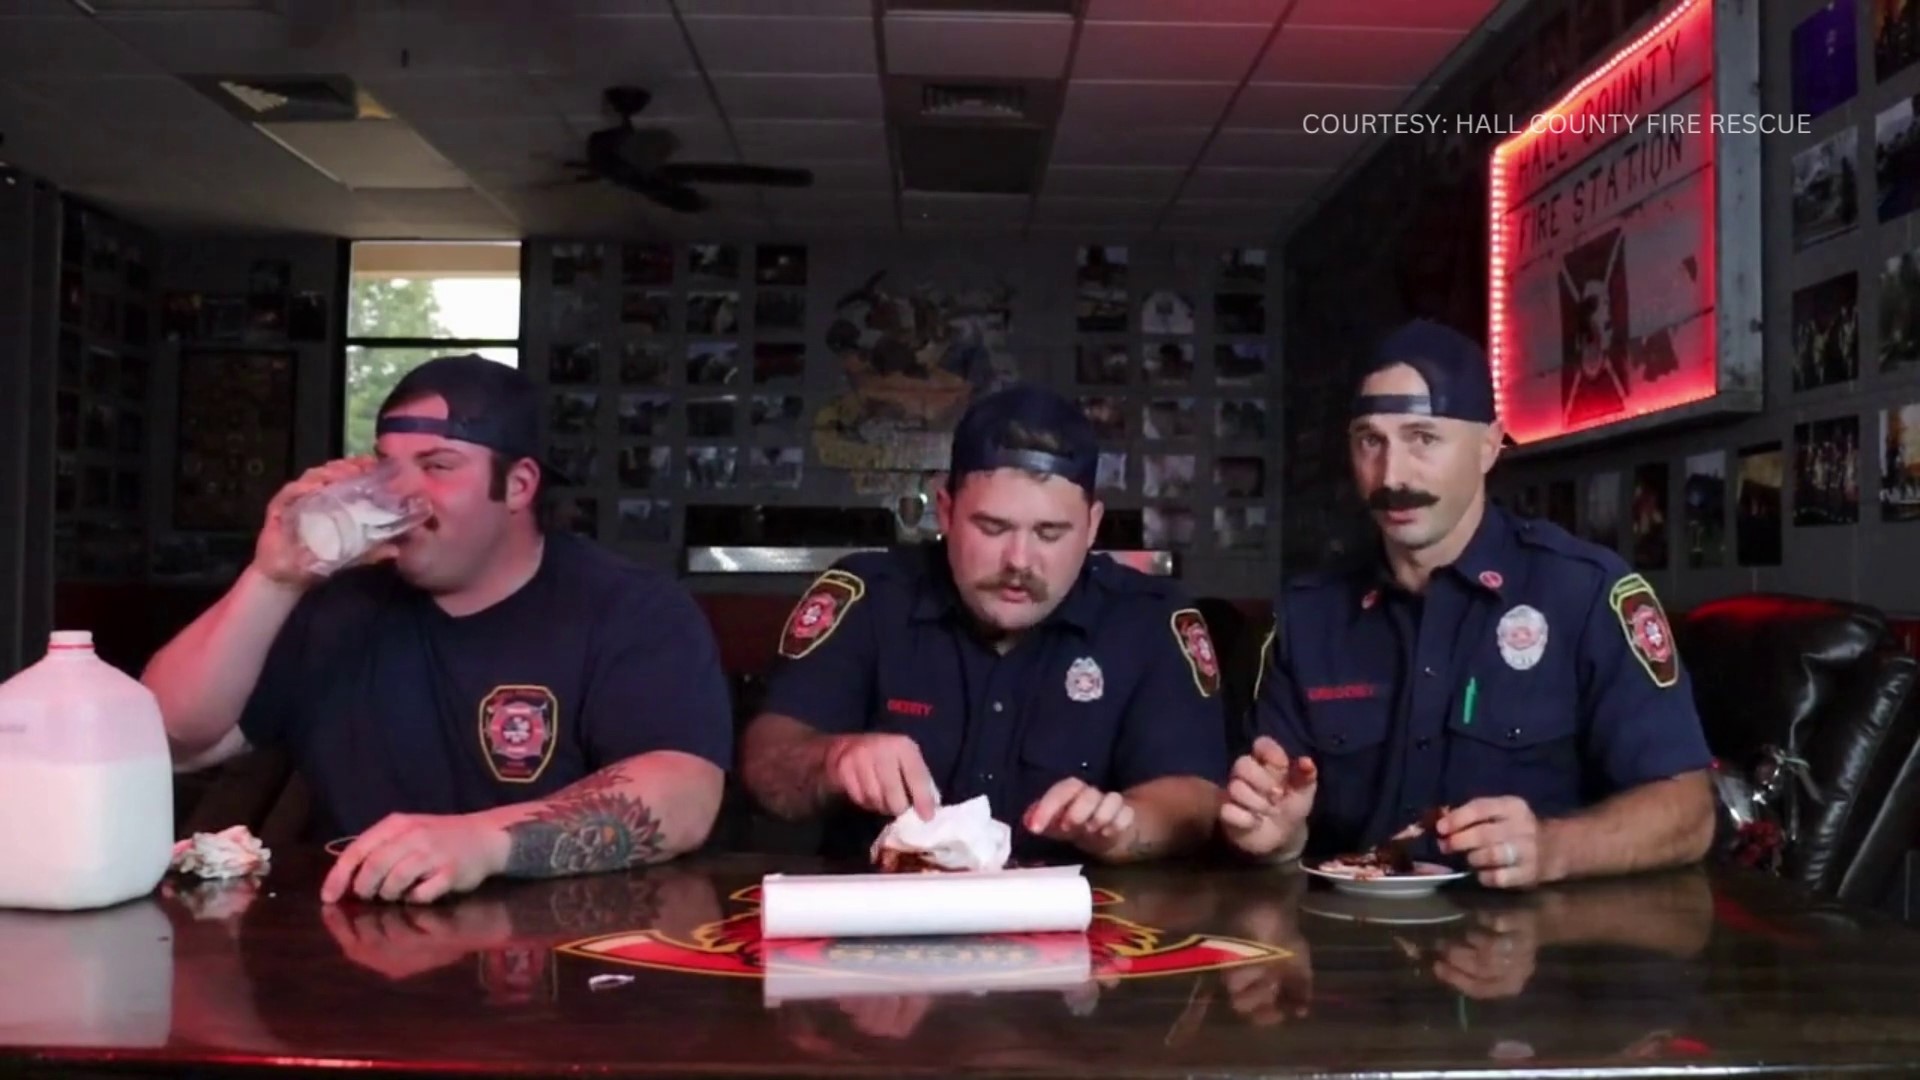 A spicy challenge had Hall County firefighters laughing and gasping for air as they tackled insanely hot wings while answering questions.